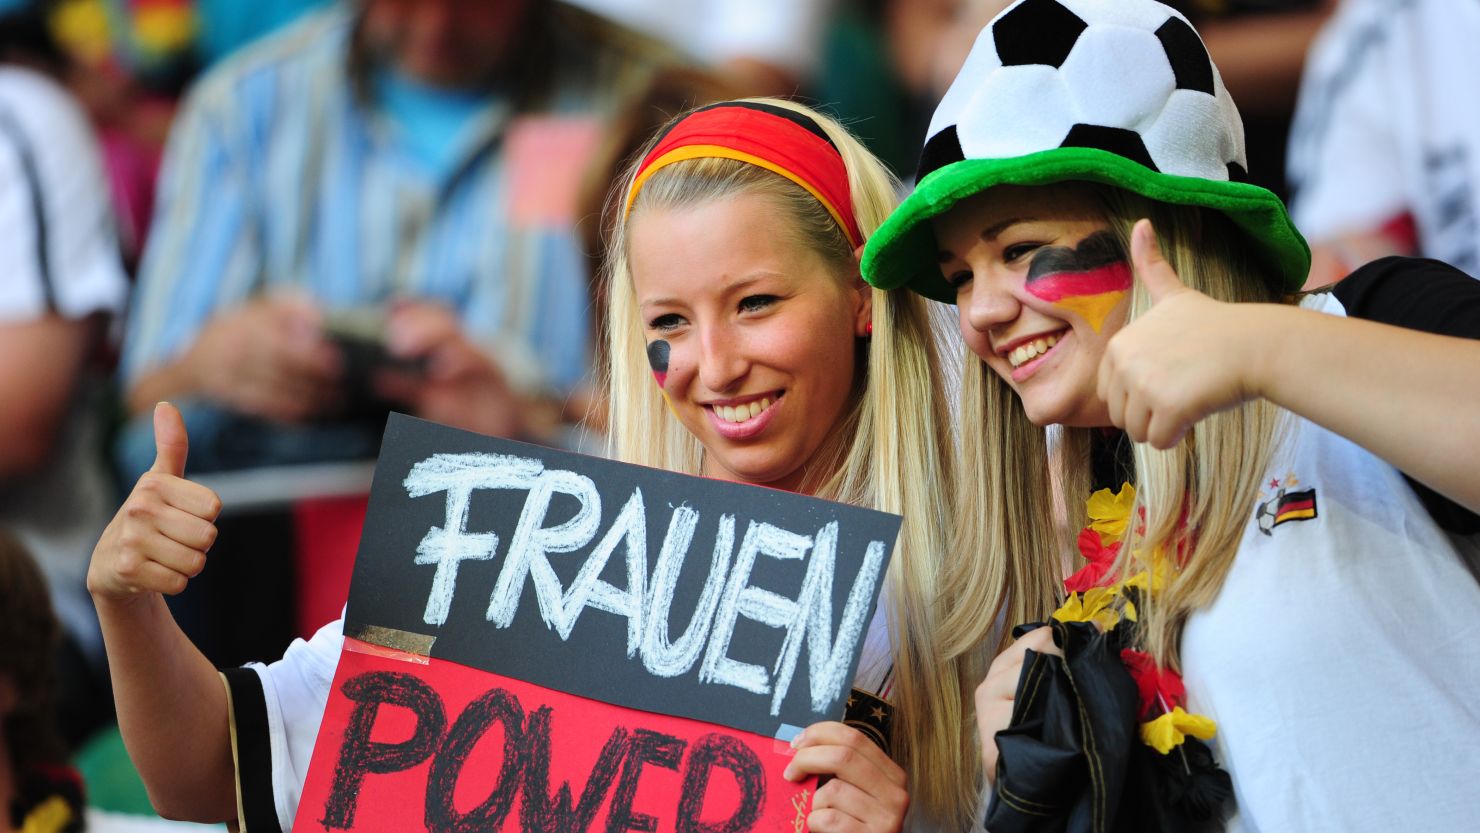 The popularity of soccer with German females is on the rise as the European Championships approaches